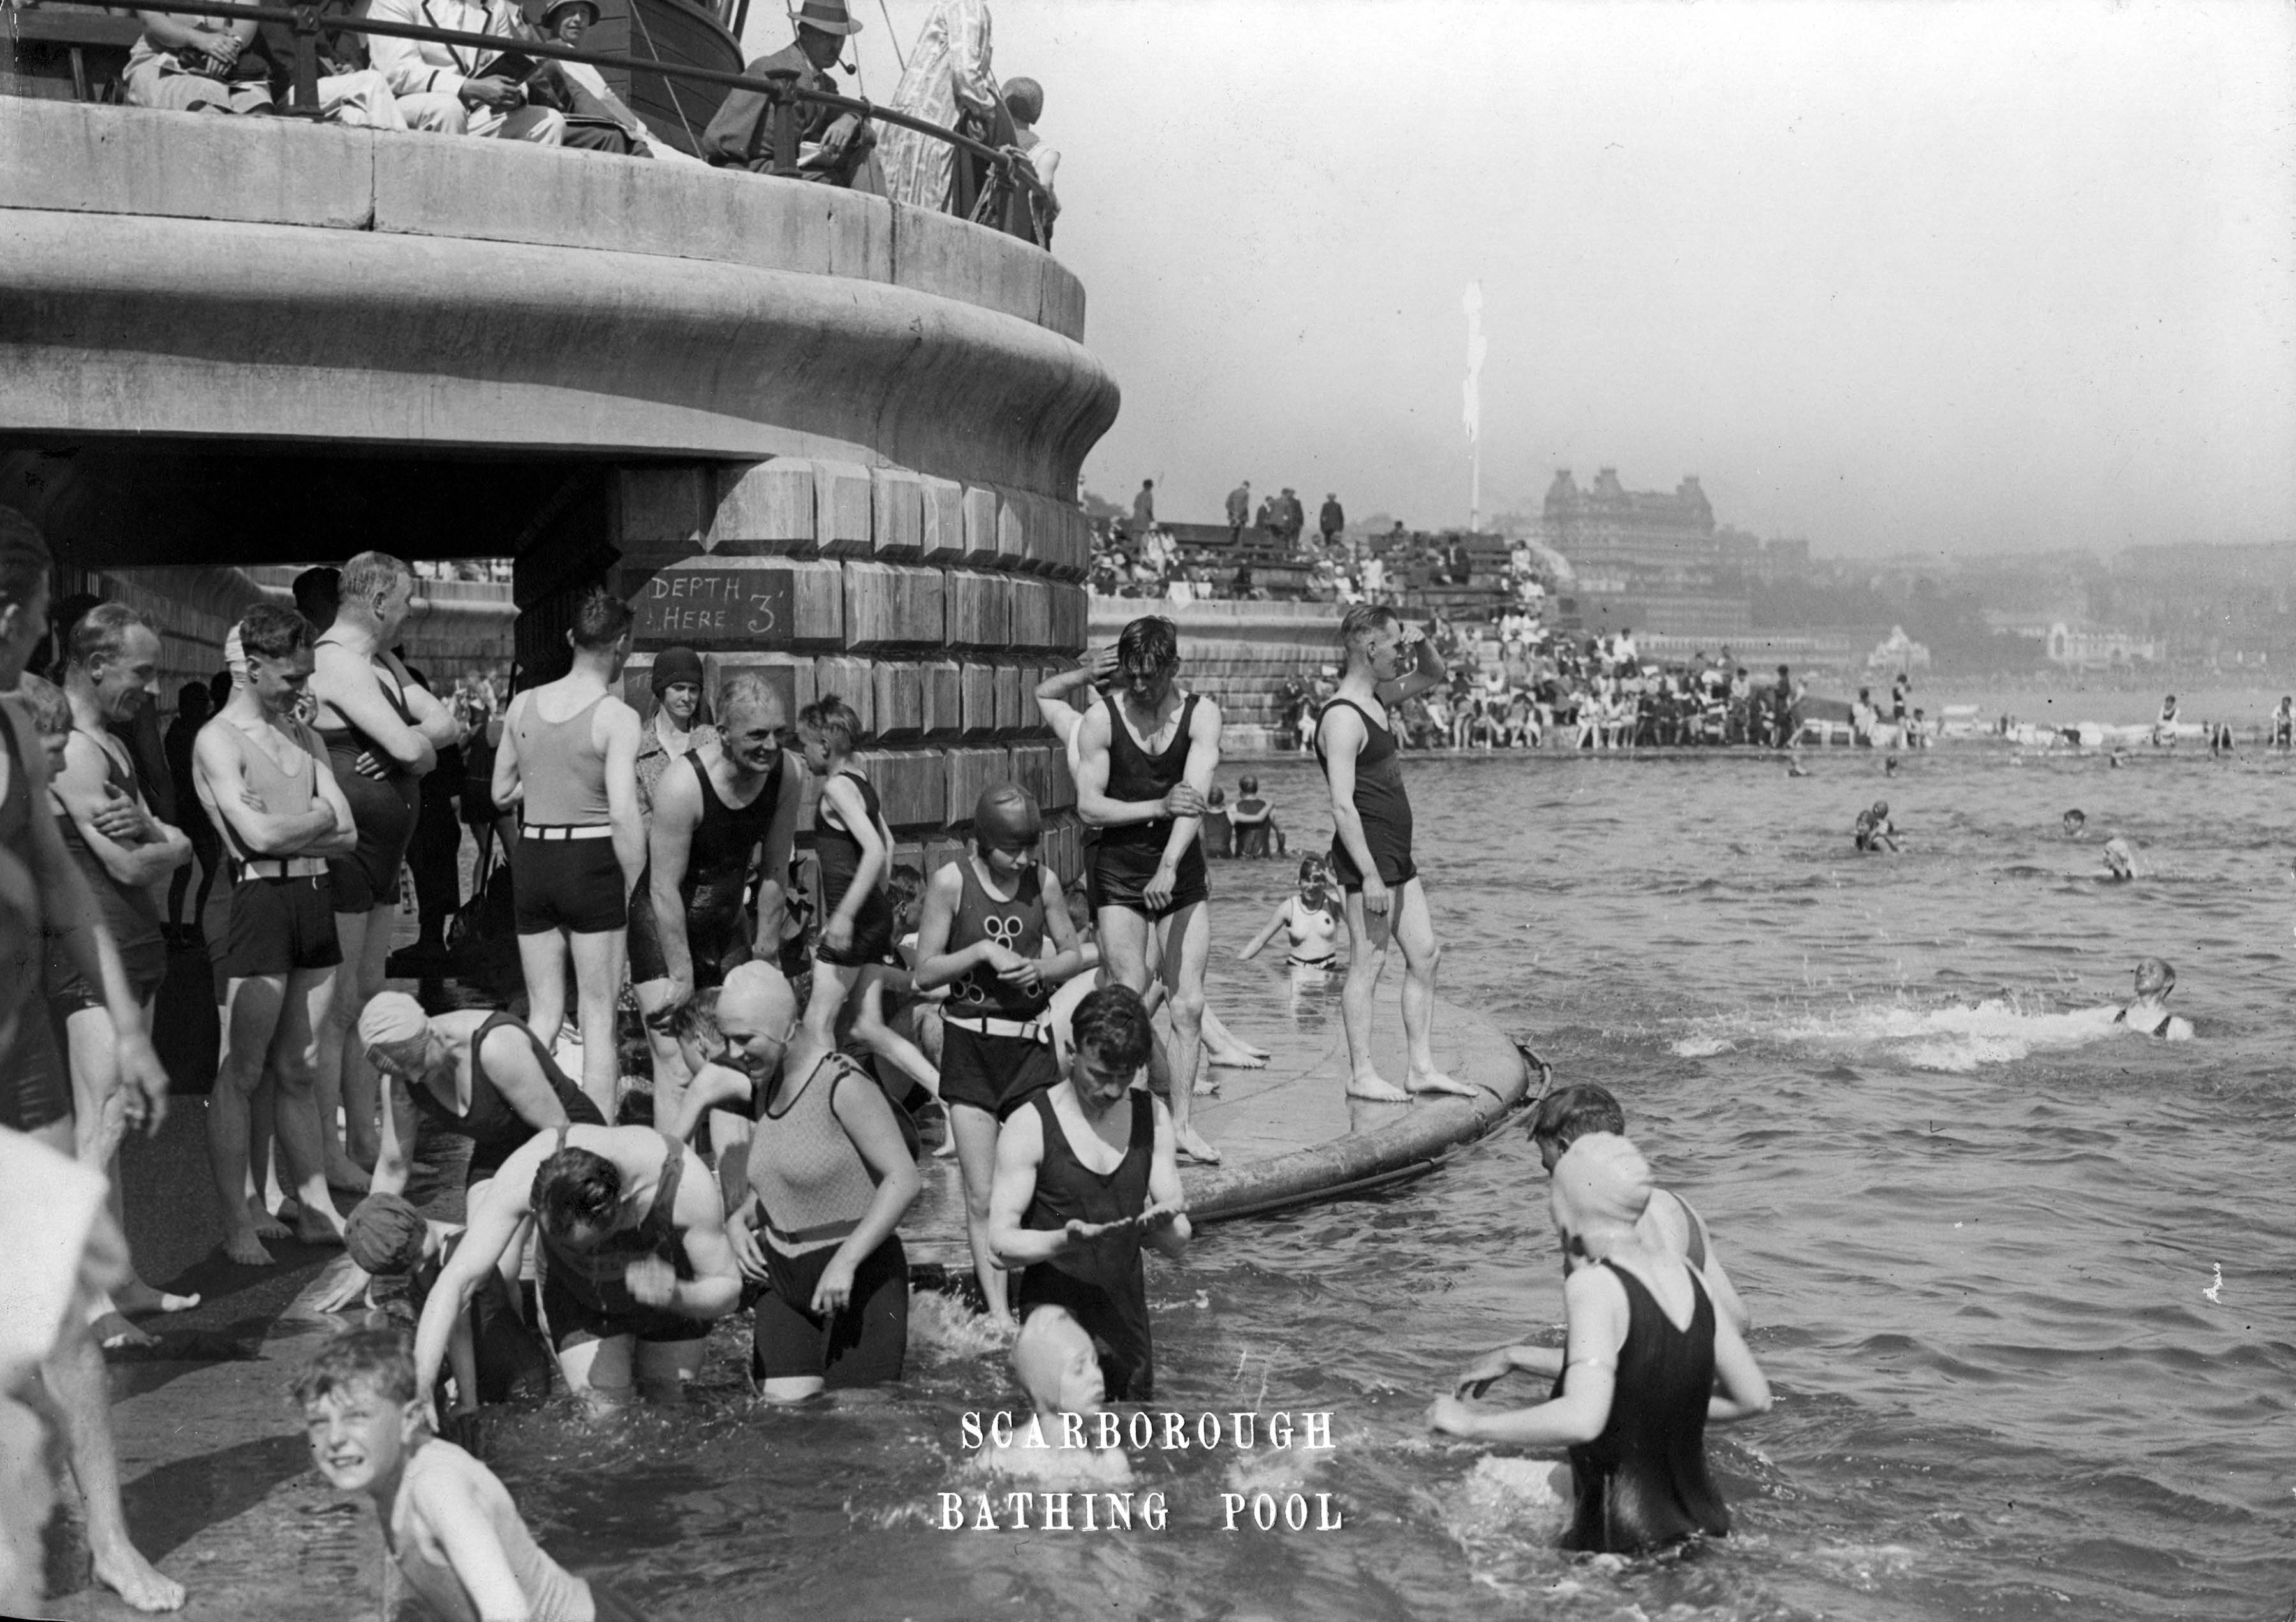 Scarborough bathing pool in South Bay. Built during the First World War, it opened in July 1915 and offered unheated sea bathing until the 1980s.